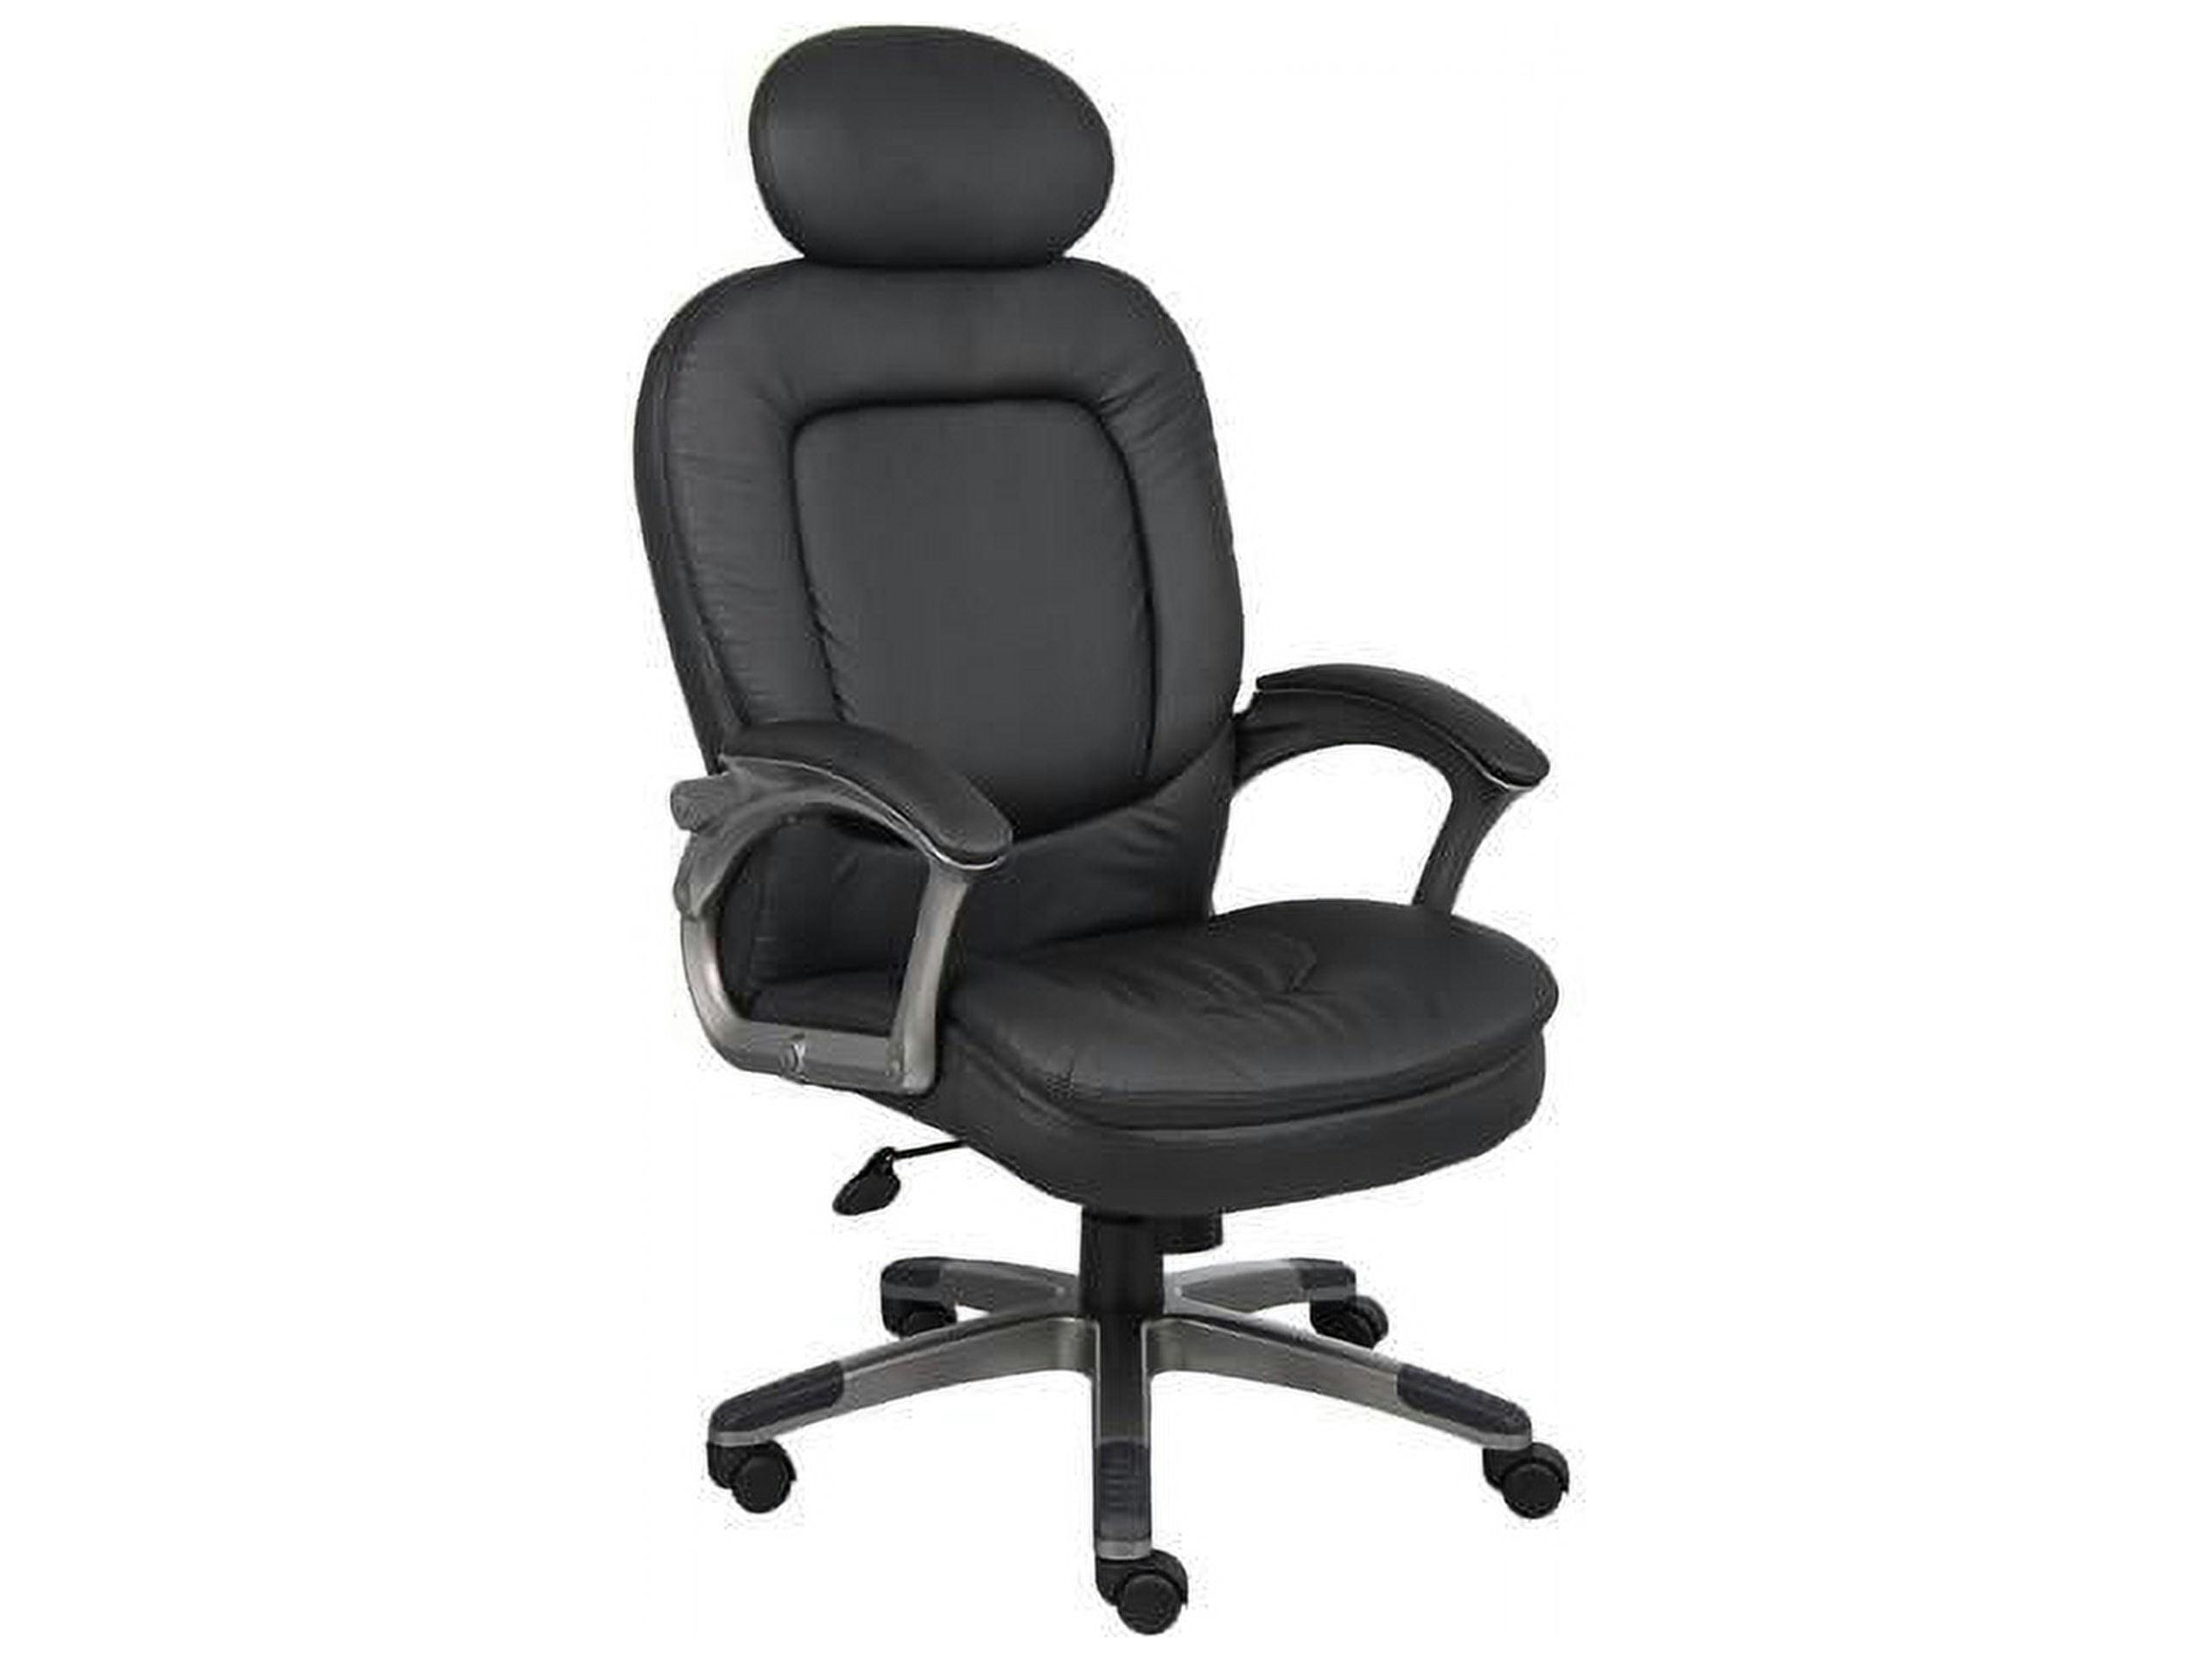 Pewter Finish High-Back Executive Leather Swivel Chair with Pillow Top